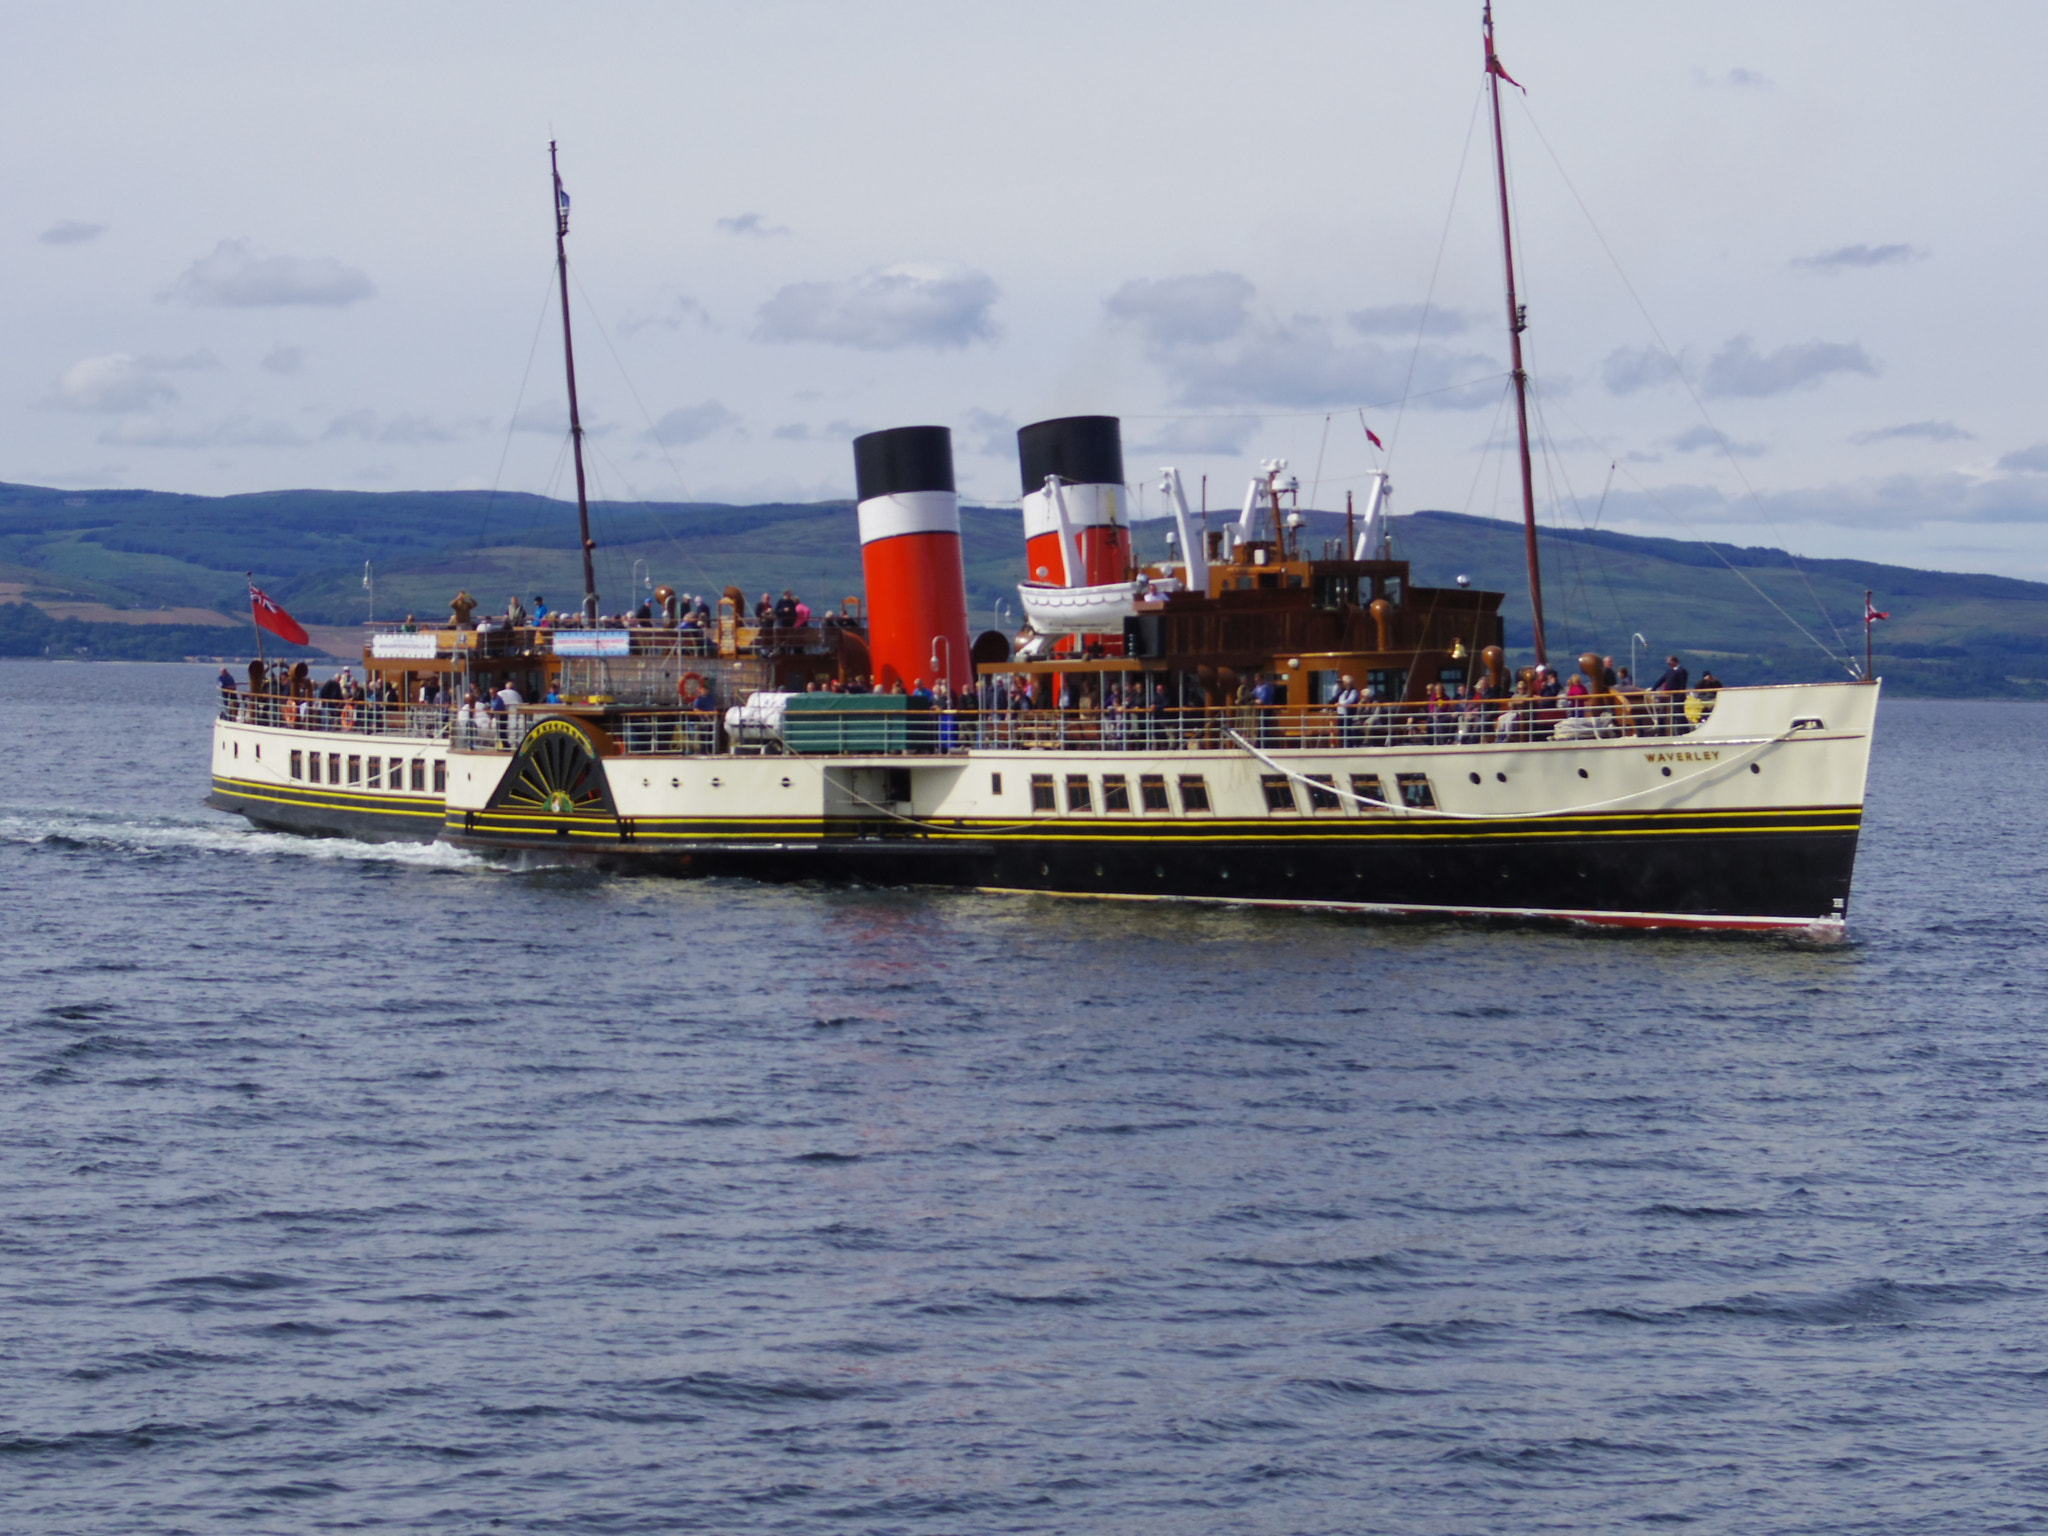 Pentax Q sample photo. Waverley steaming into lochranza en route to glasgow photography